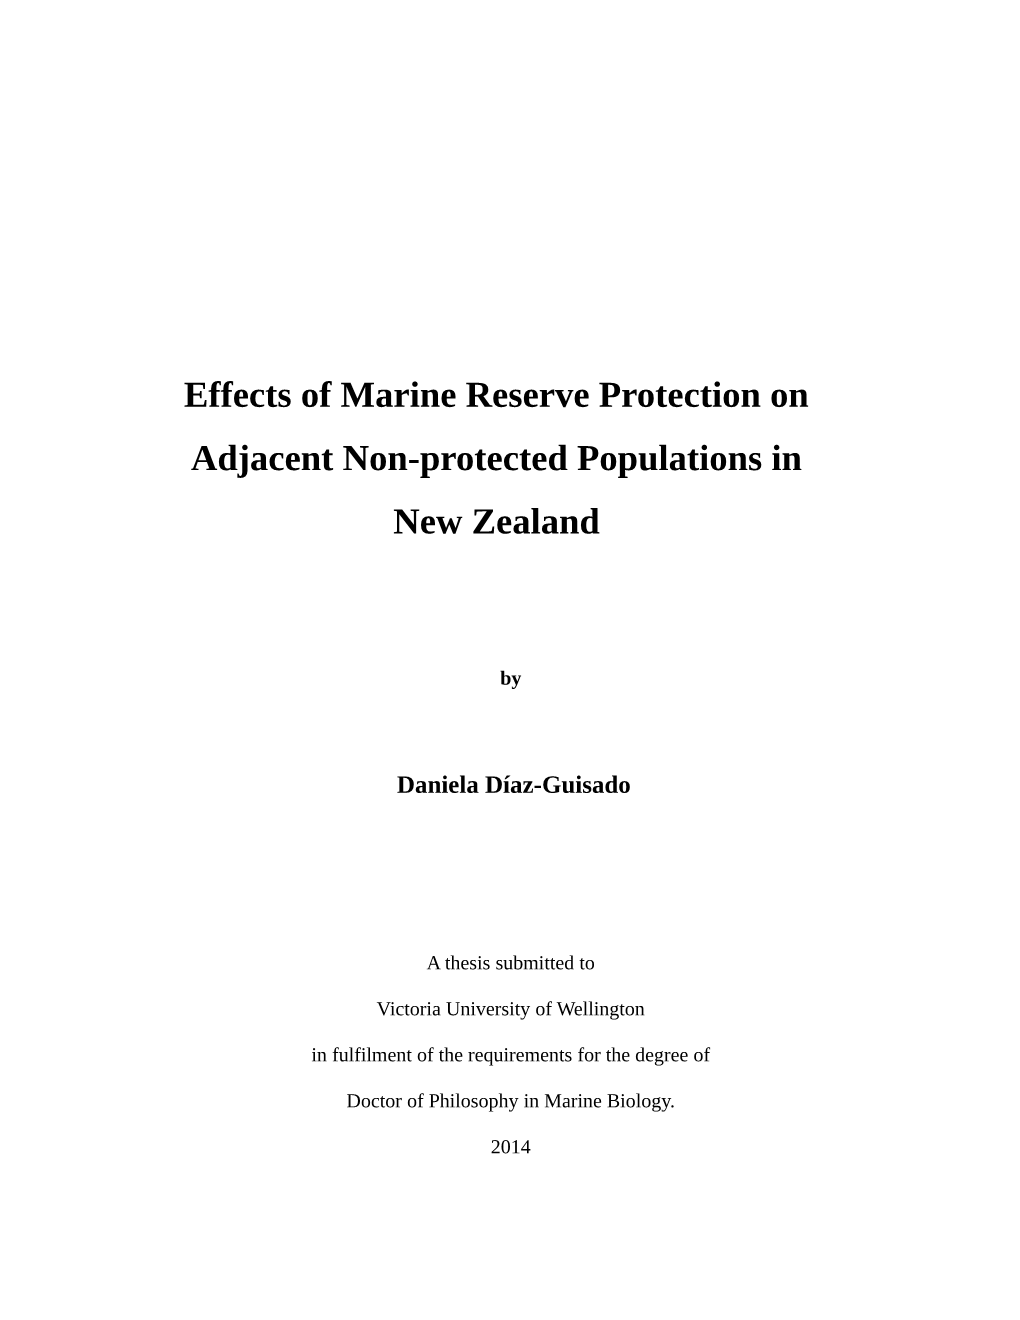 Effects of Marine Reserve Protection on Adjacent Non-Protected Populations in New Zealand